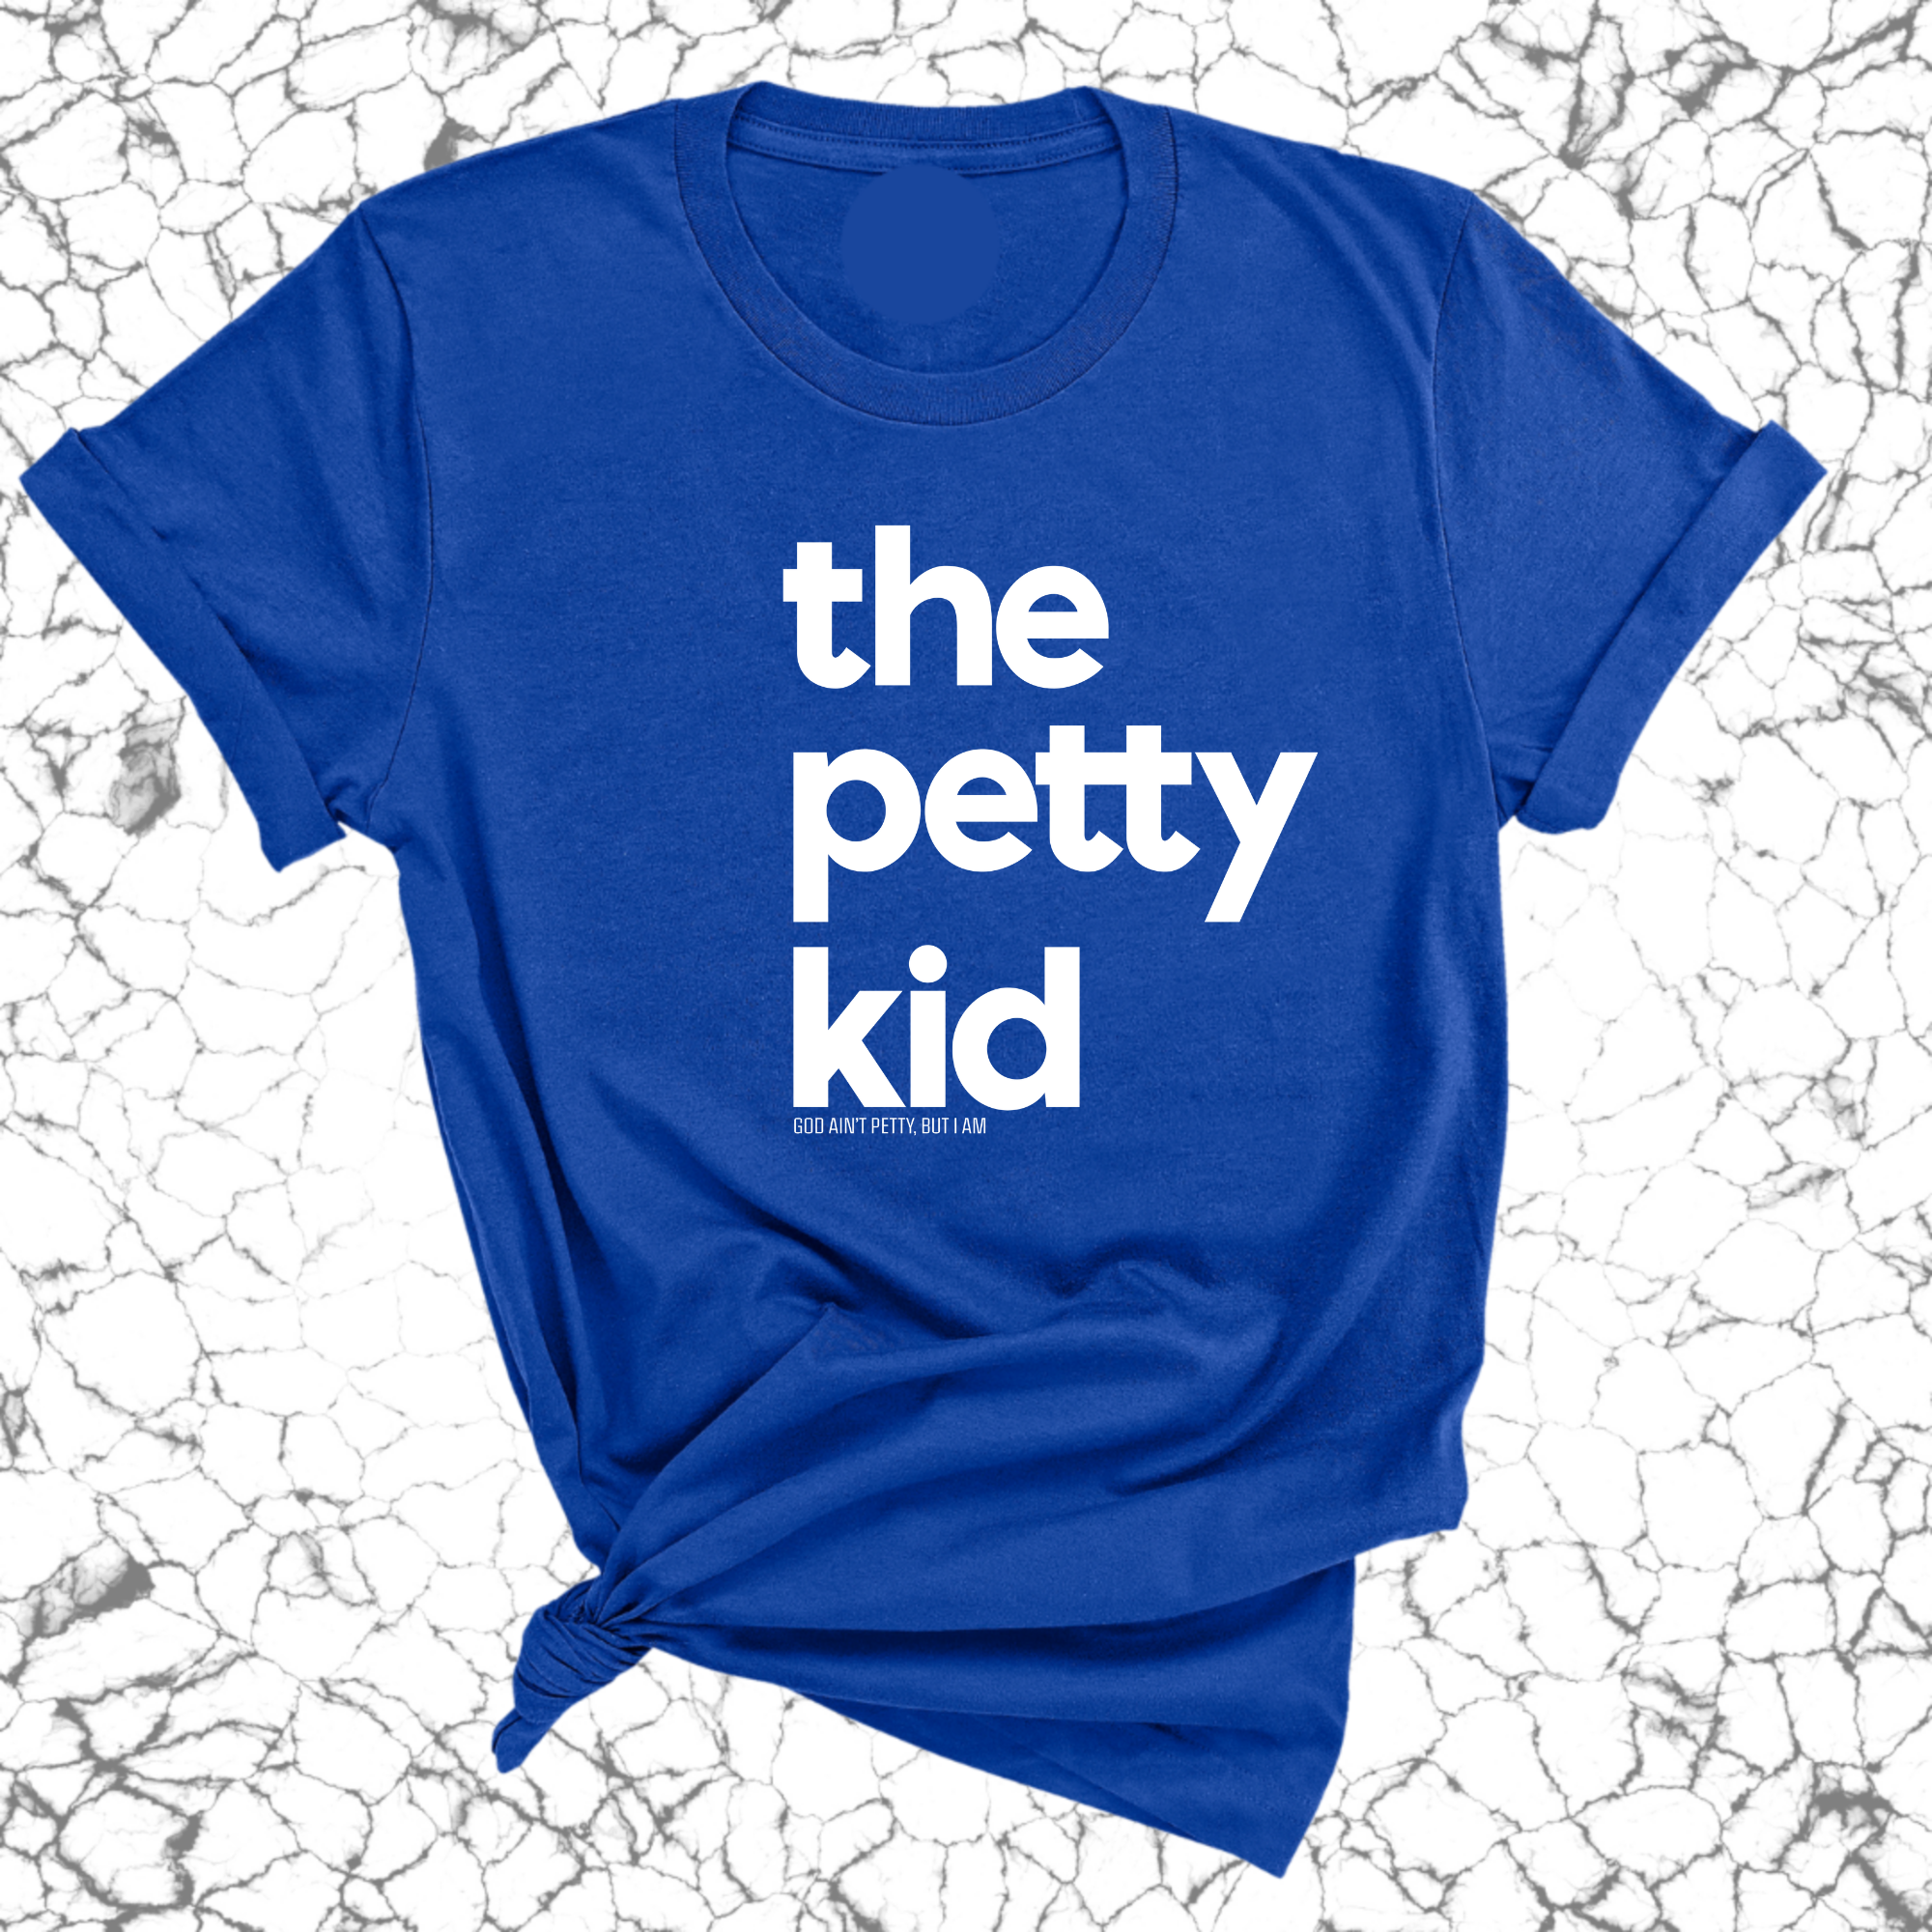 The Petty Kid Unisex Tee (adult size)-T-Shirt-The Original God Ain't Petty But I Am